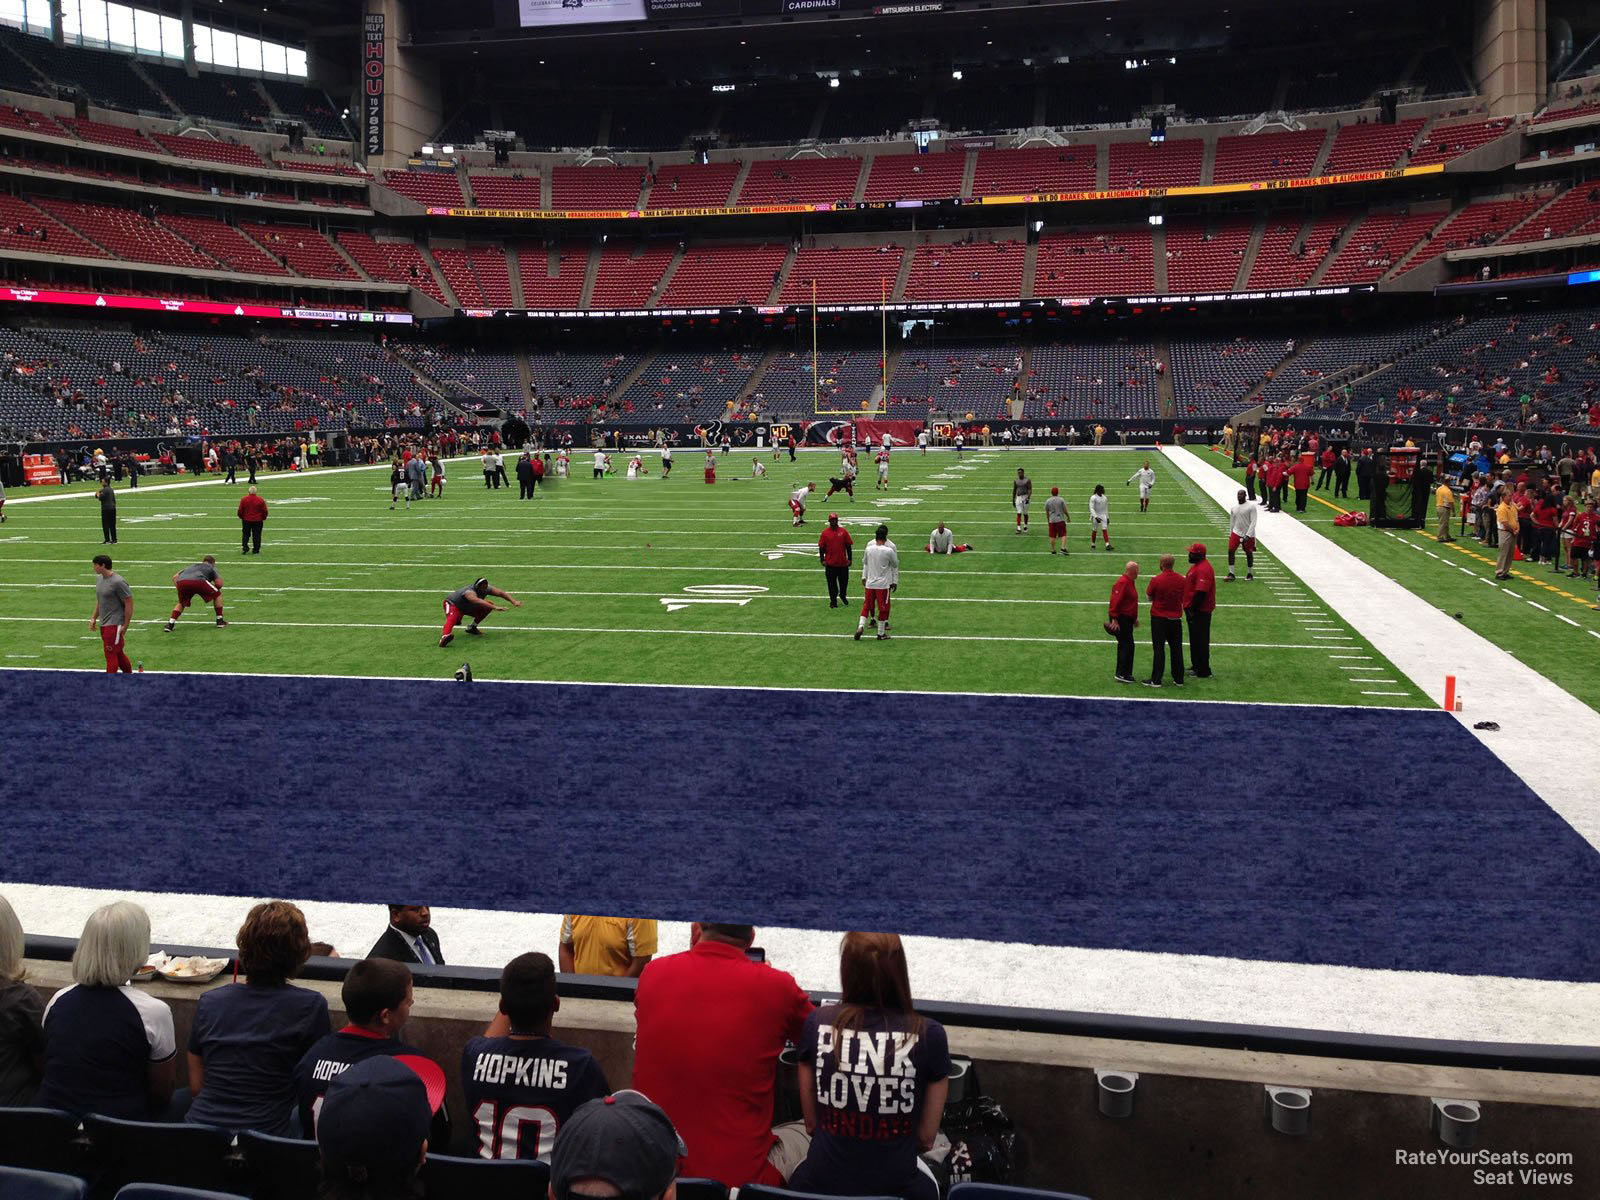 section 135, row c seat view  for football - nrg stadium